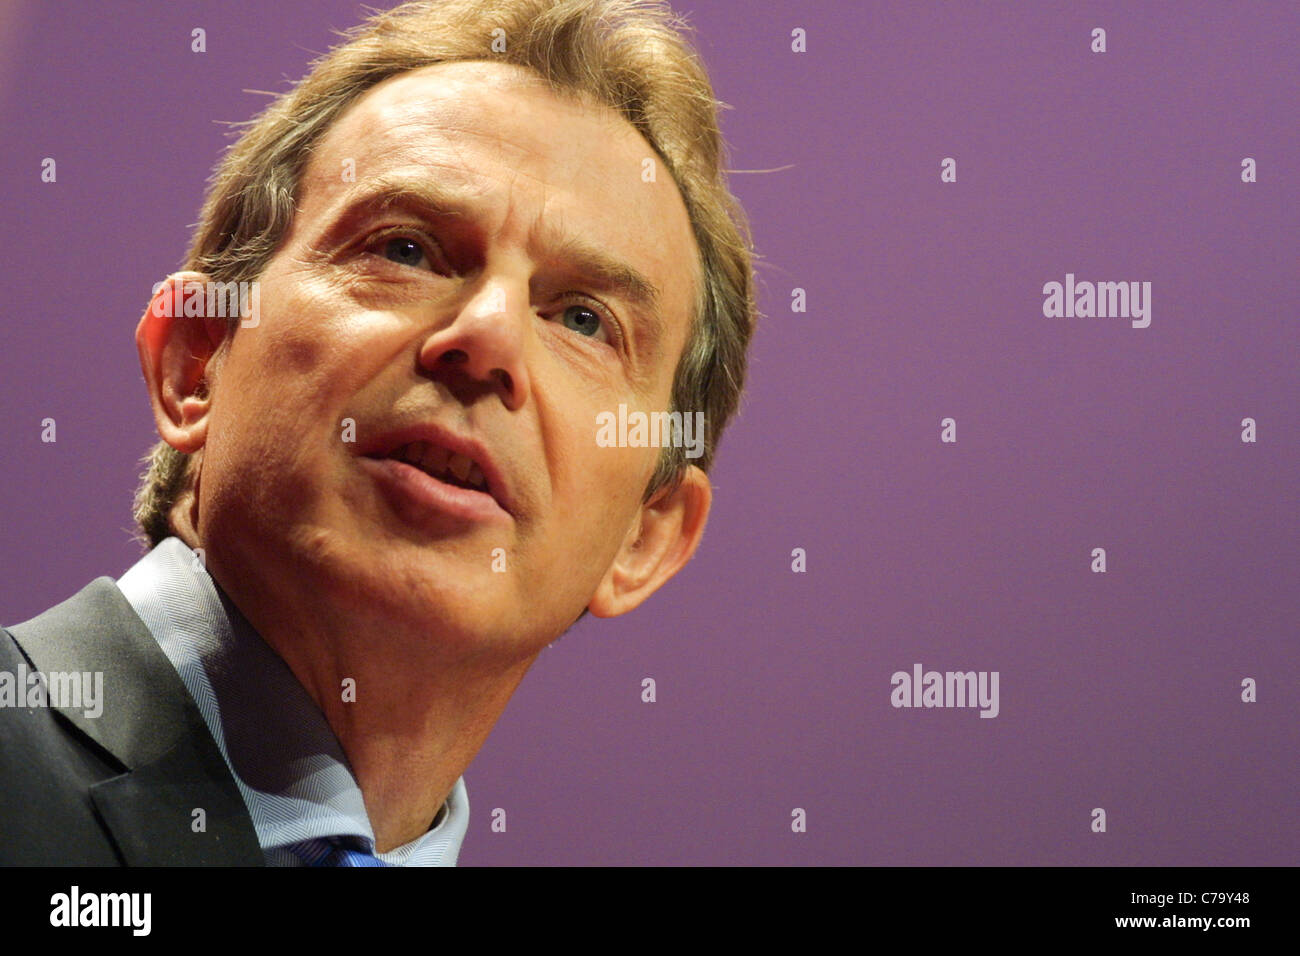 Prime Minister Tony Blair speaks at the Labour Party conference, held in Glasgow, Scotland, on 15th February 2003. Stock Photo